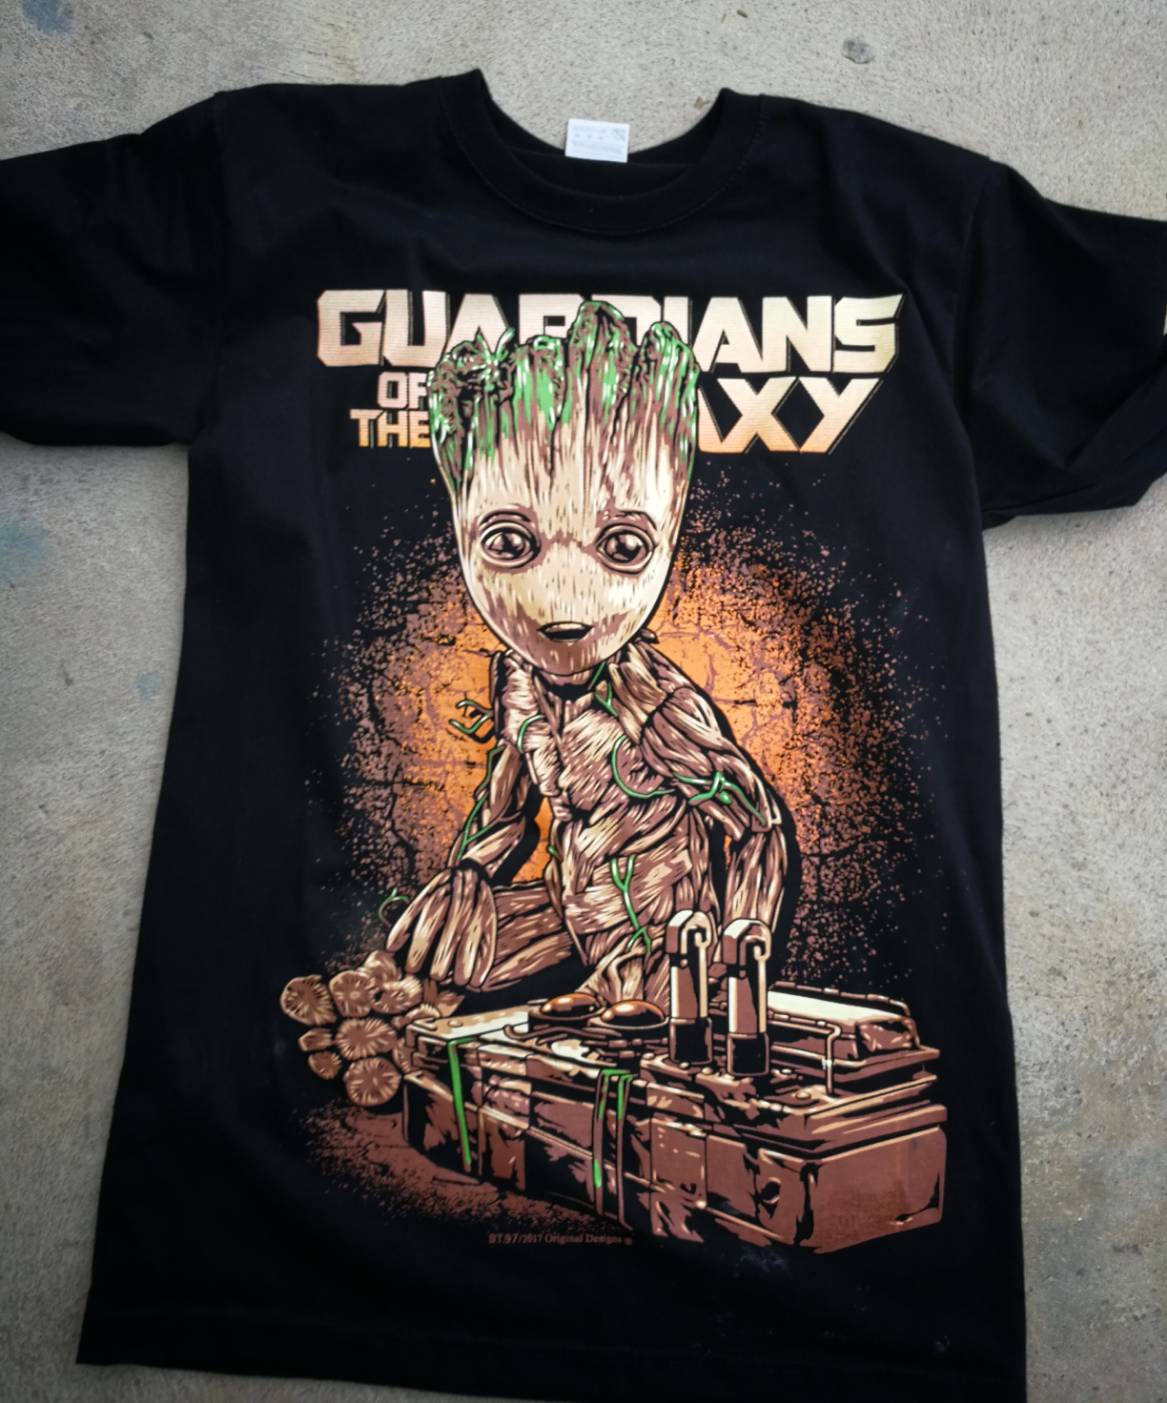 Black shirt size L and XL Groot